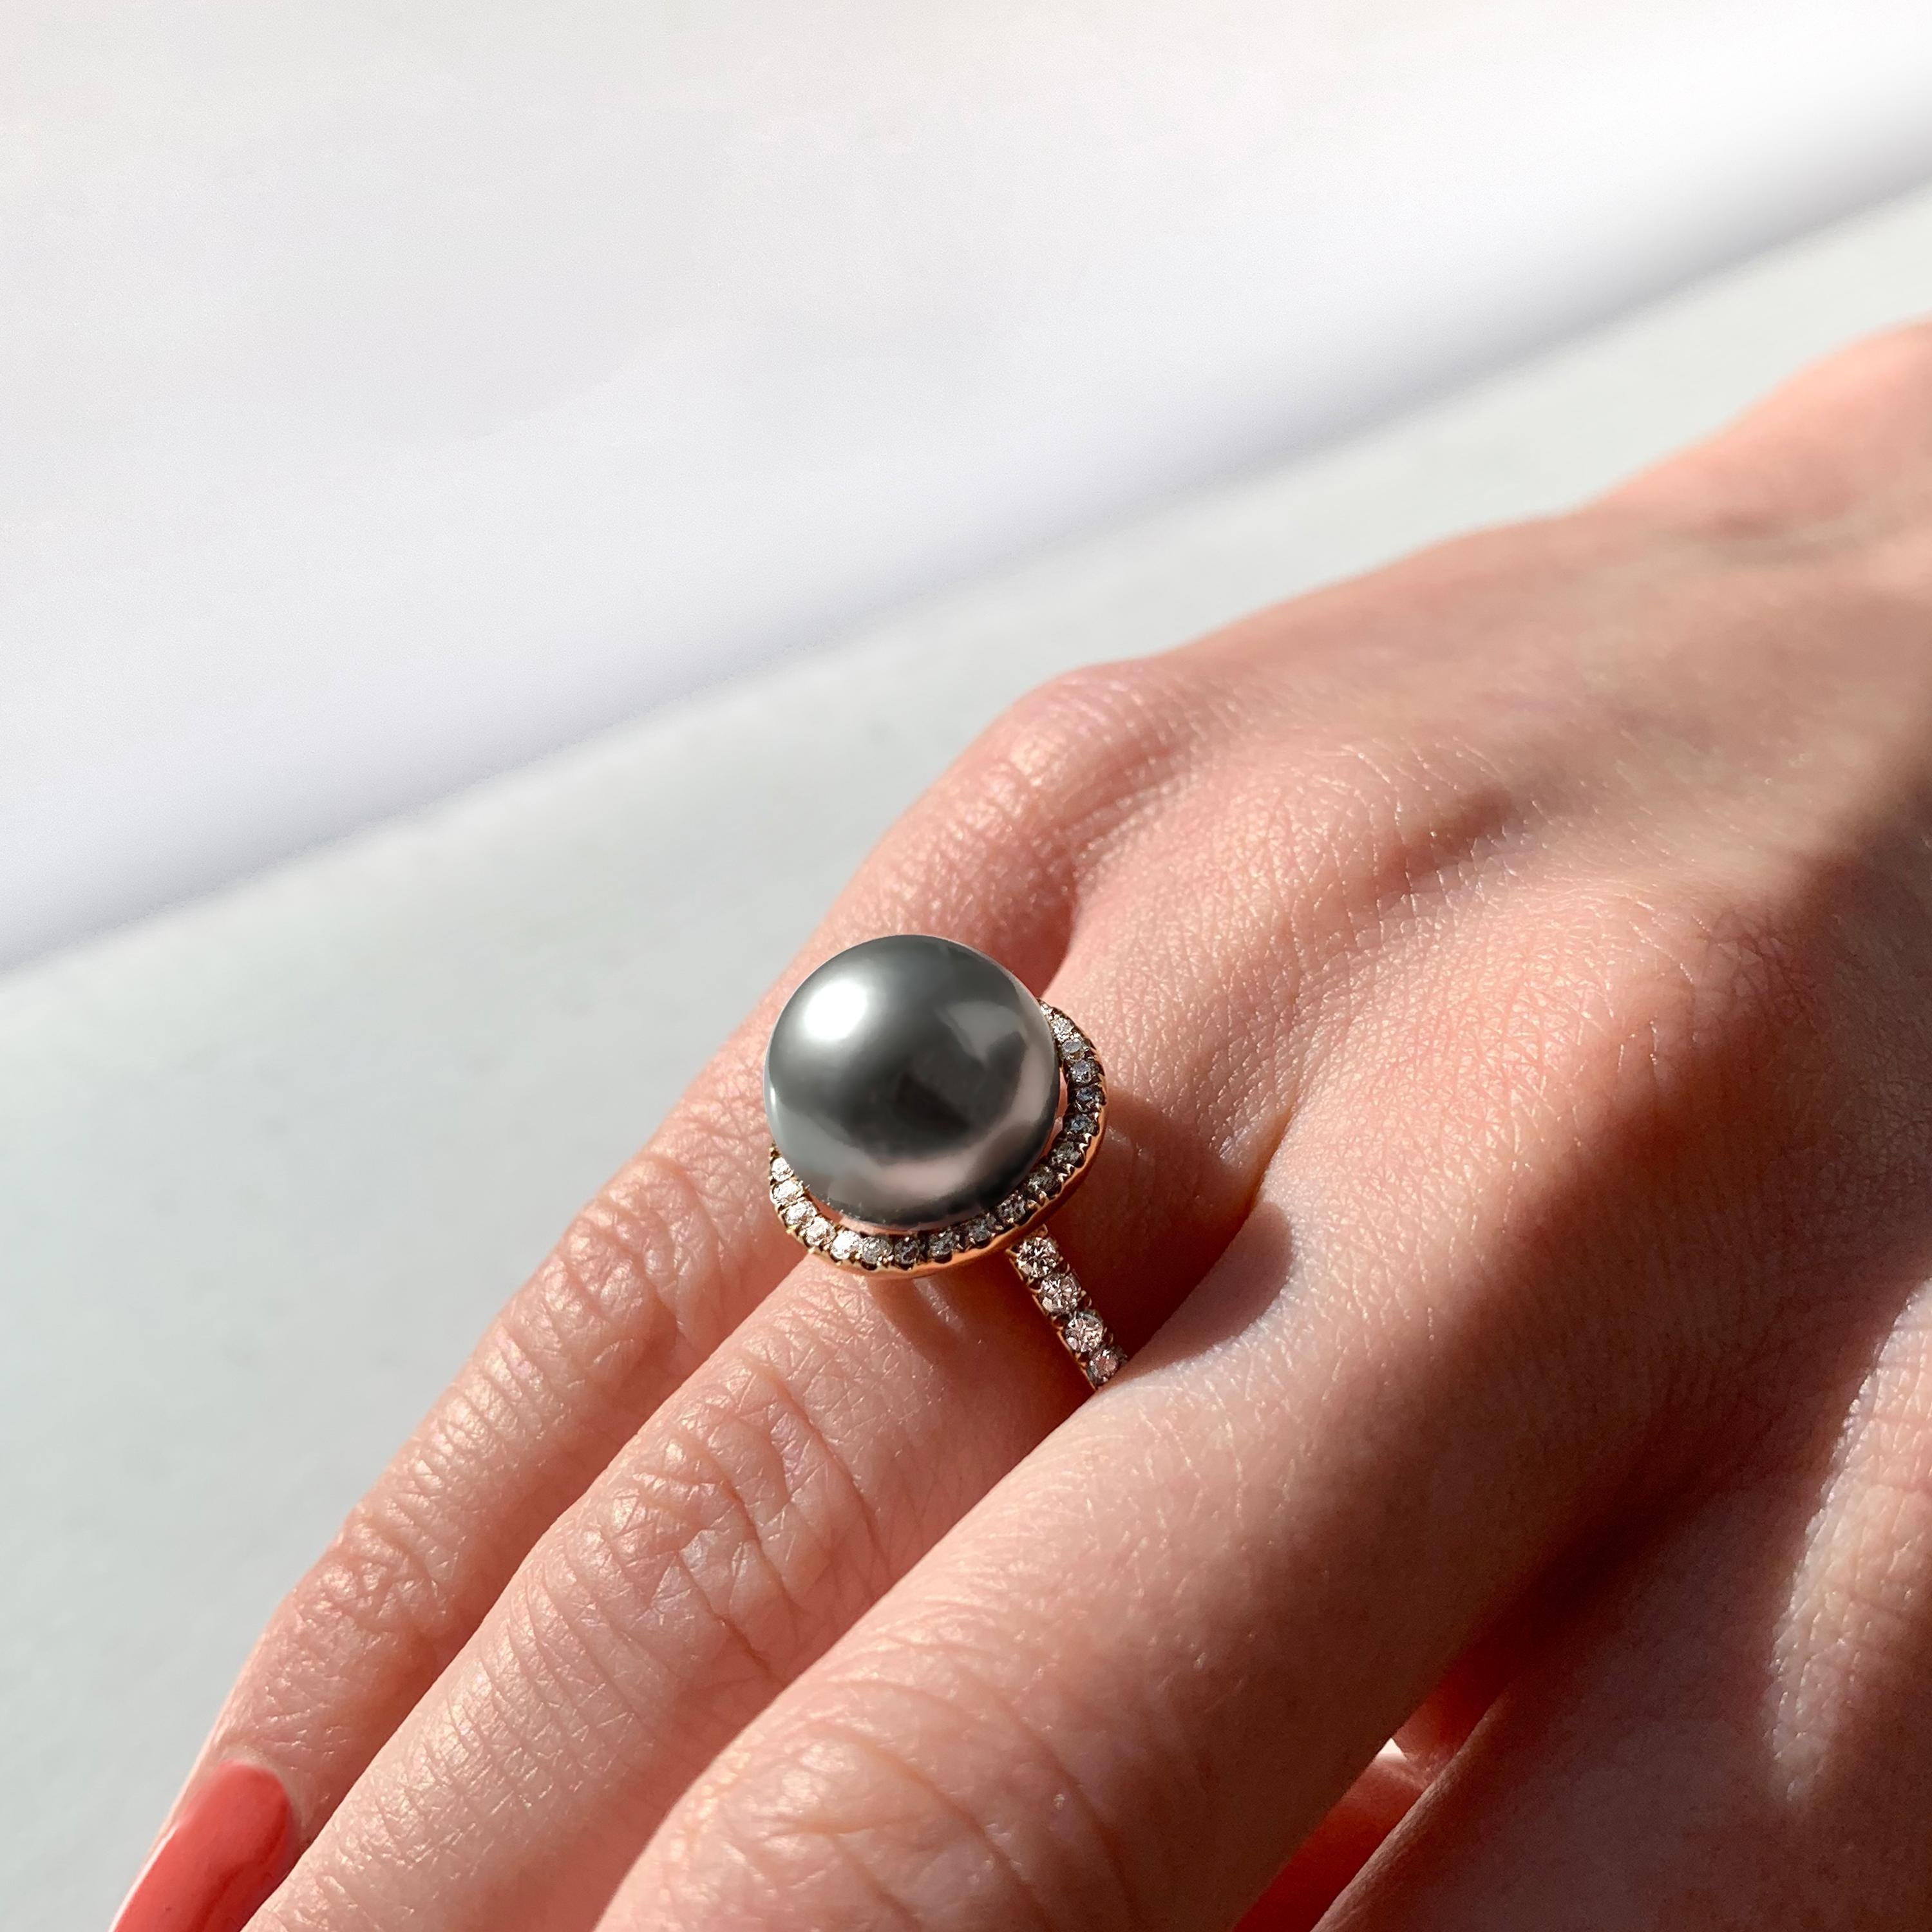 This striking ring by Yoko London features an exceptional silver Tahitian pearl at is centre, surrounded by a delicate halo of diamonds. Set in 18 Karat Rose gold to provide a unique, but elegant contrast to the colour of the Tahitian pearl, this